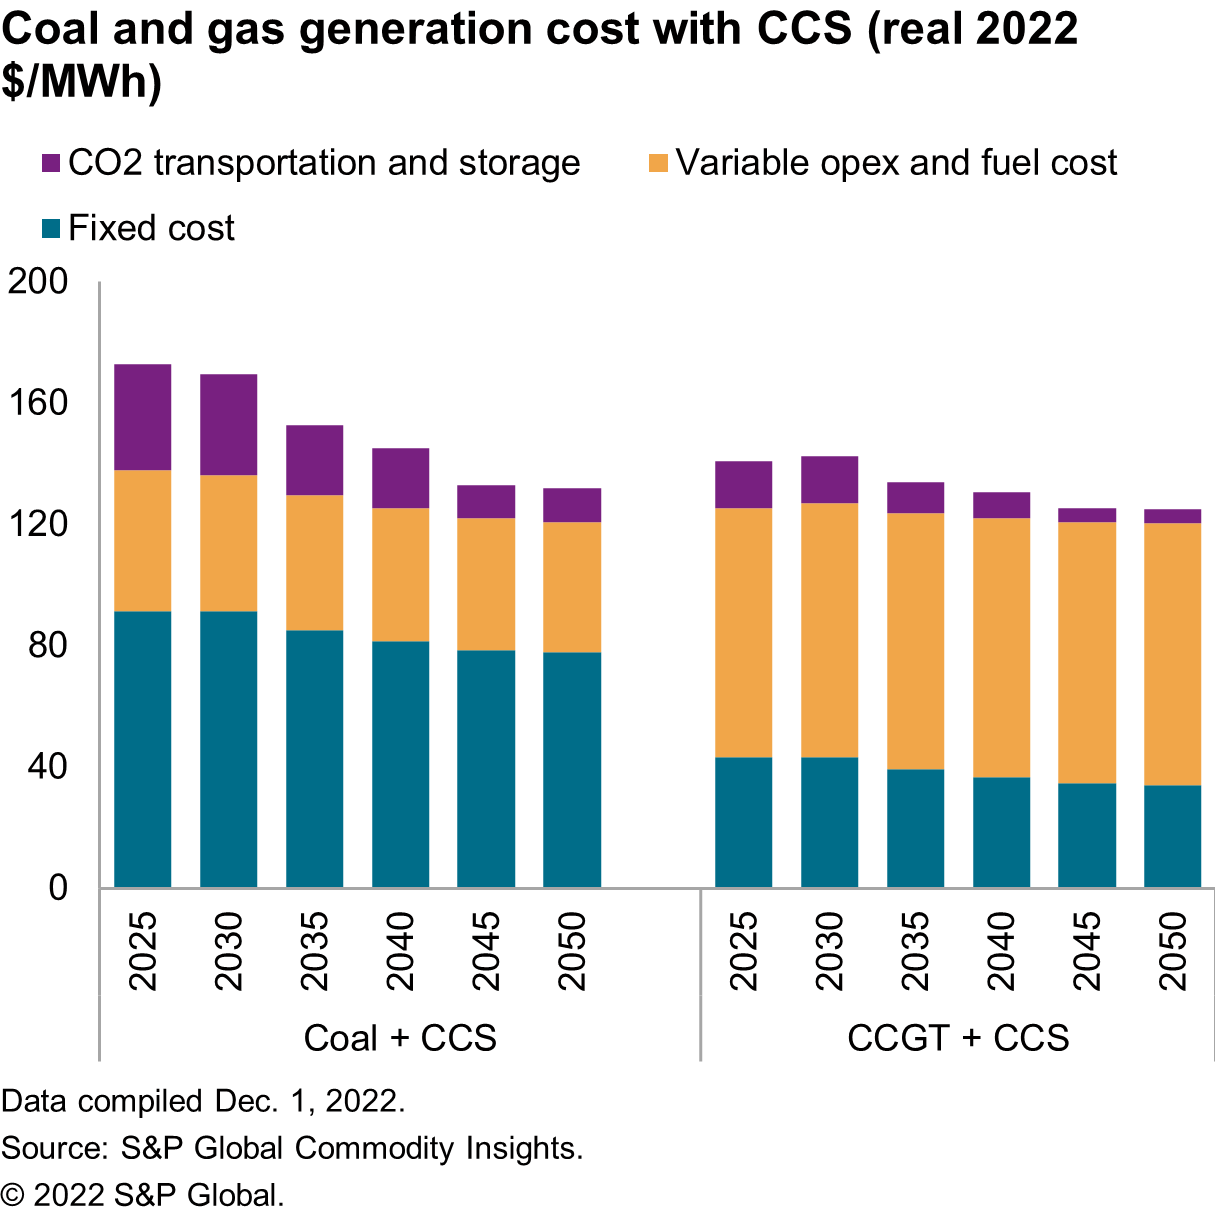 Coal and gas generation cost with CCS